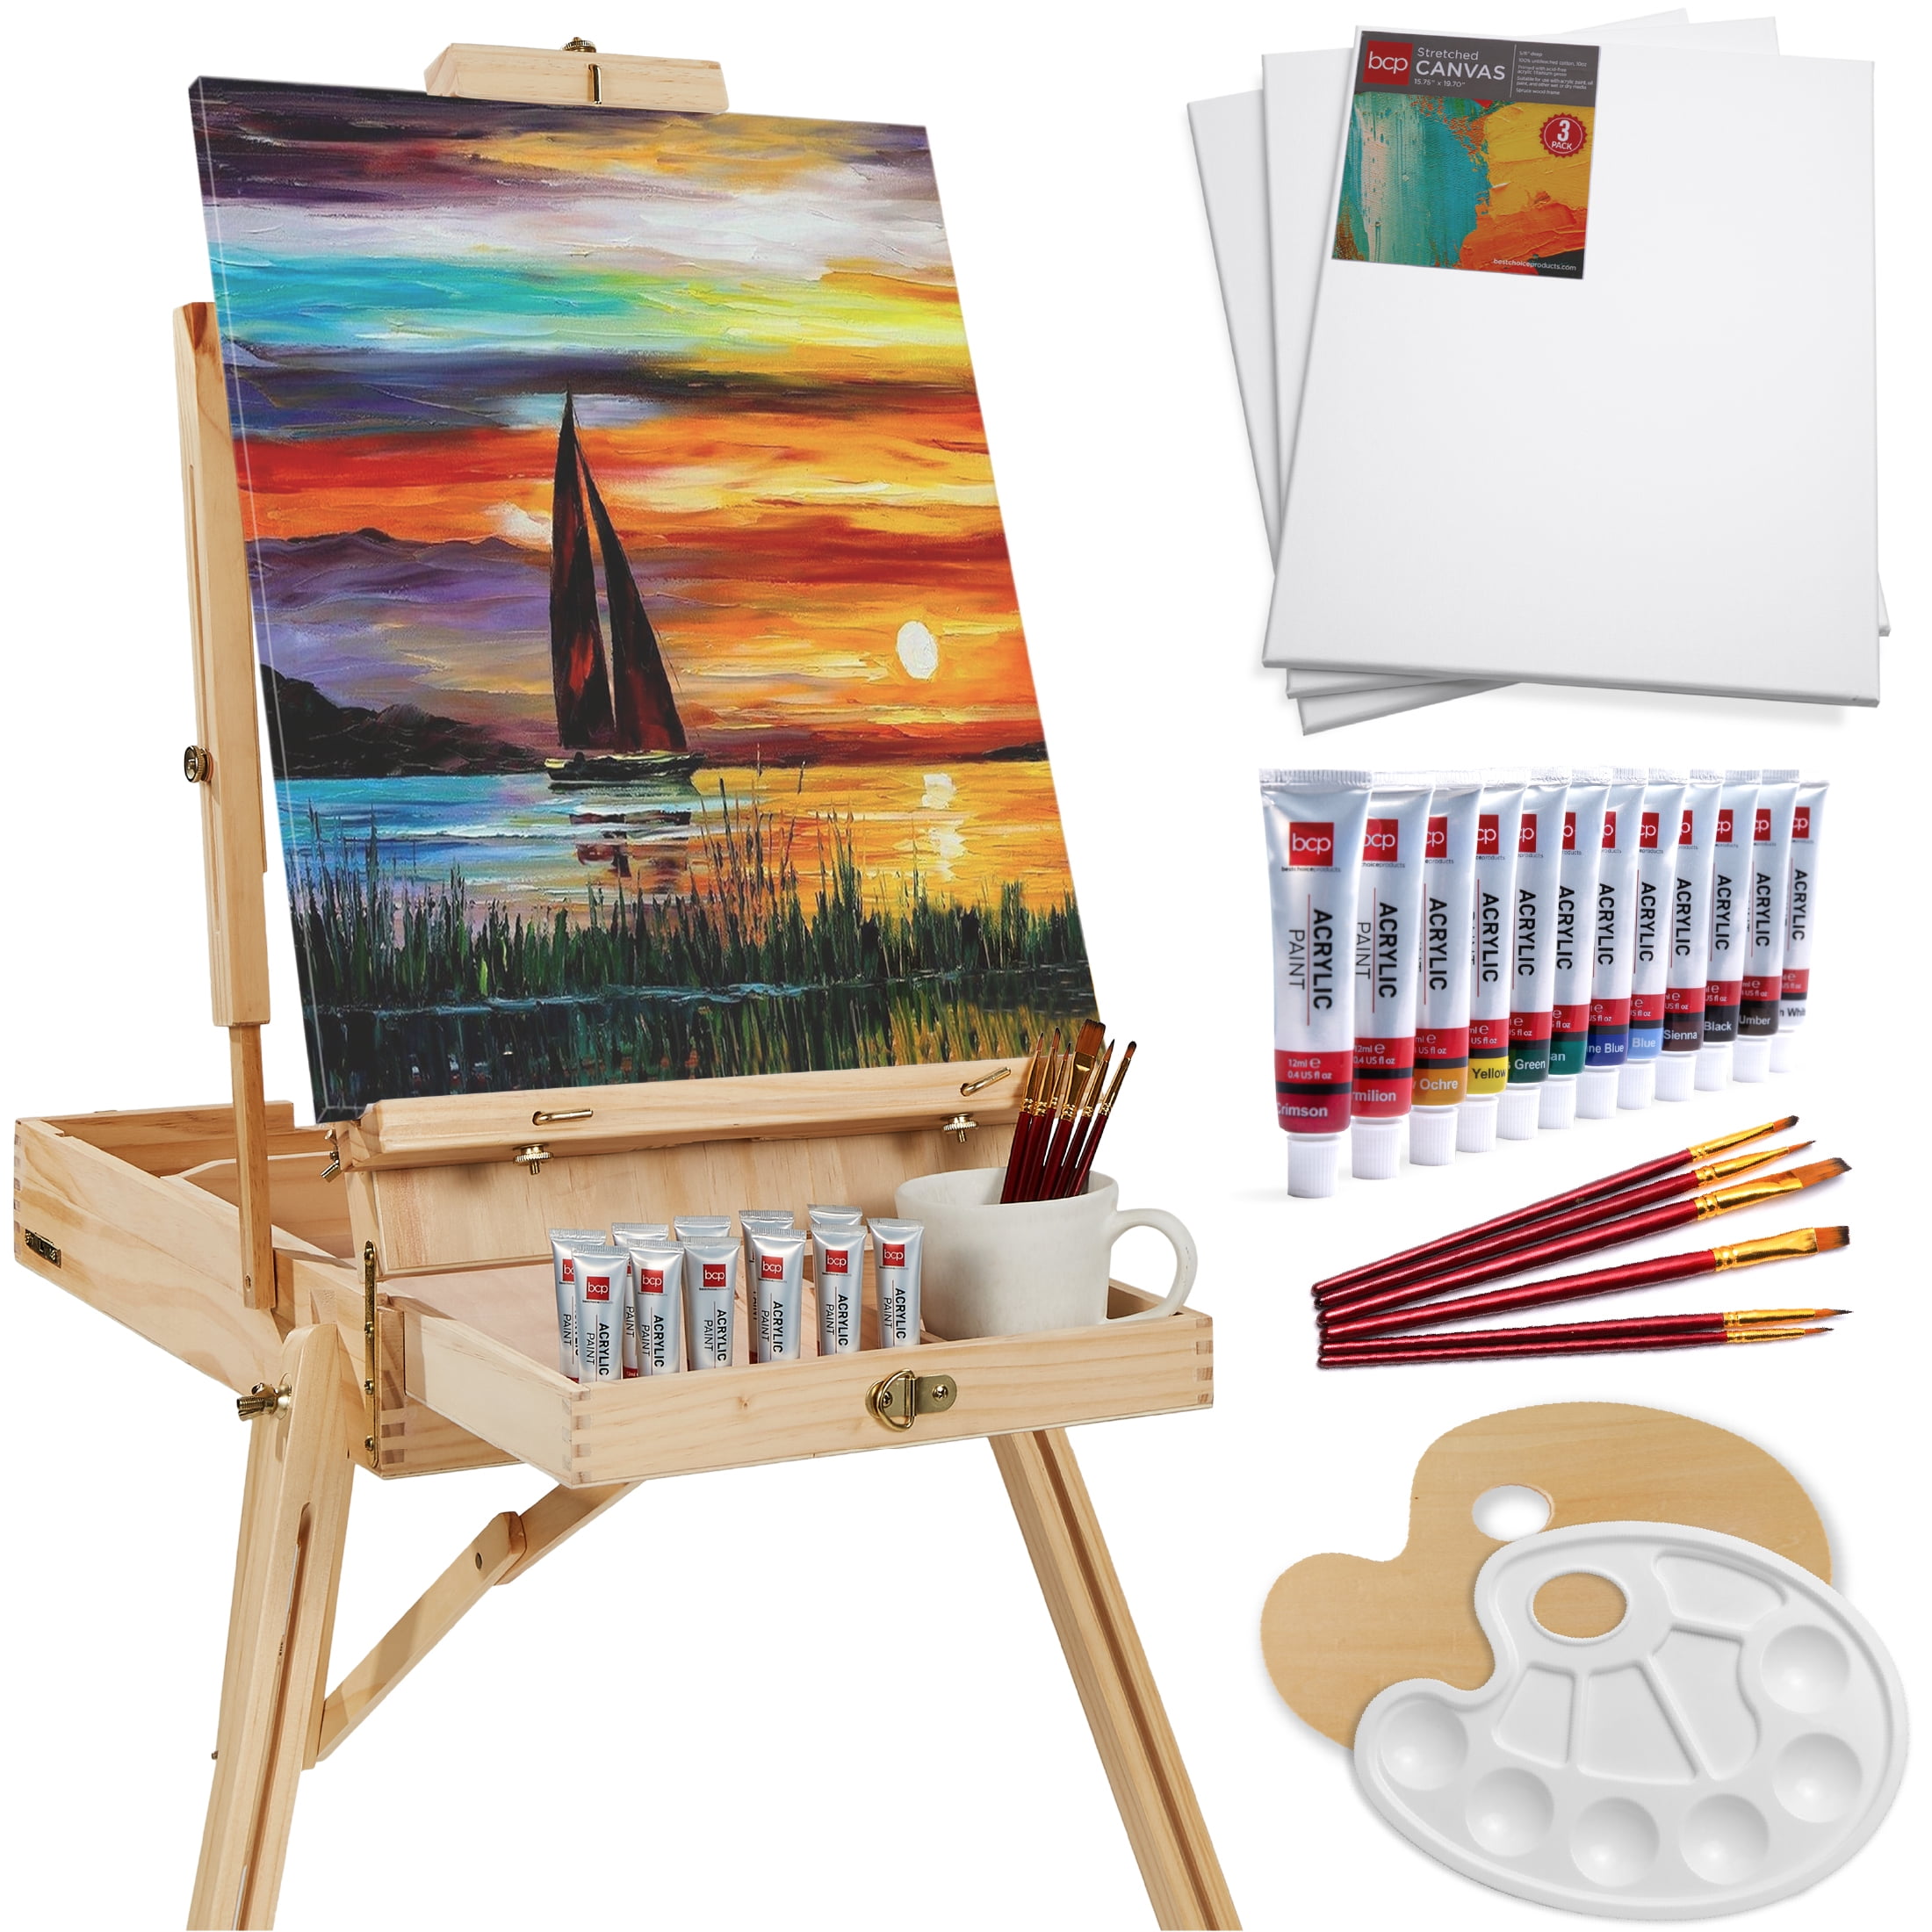 Acrylic Painting Set, Shuttle Art 59 Pack Professional Painting Supplies  with Wood Tabletop Easel, 30 Colors Acrylic Paint, Canvas, Brushes,  Palette